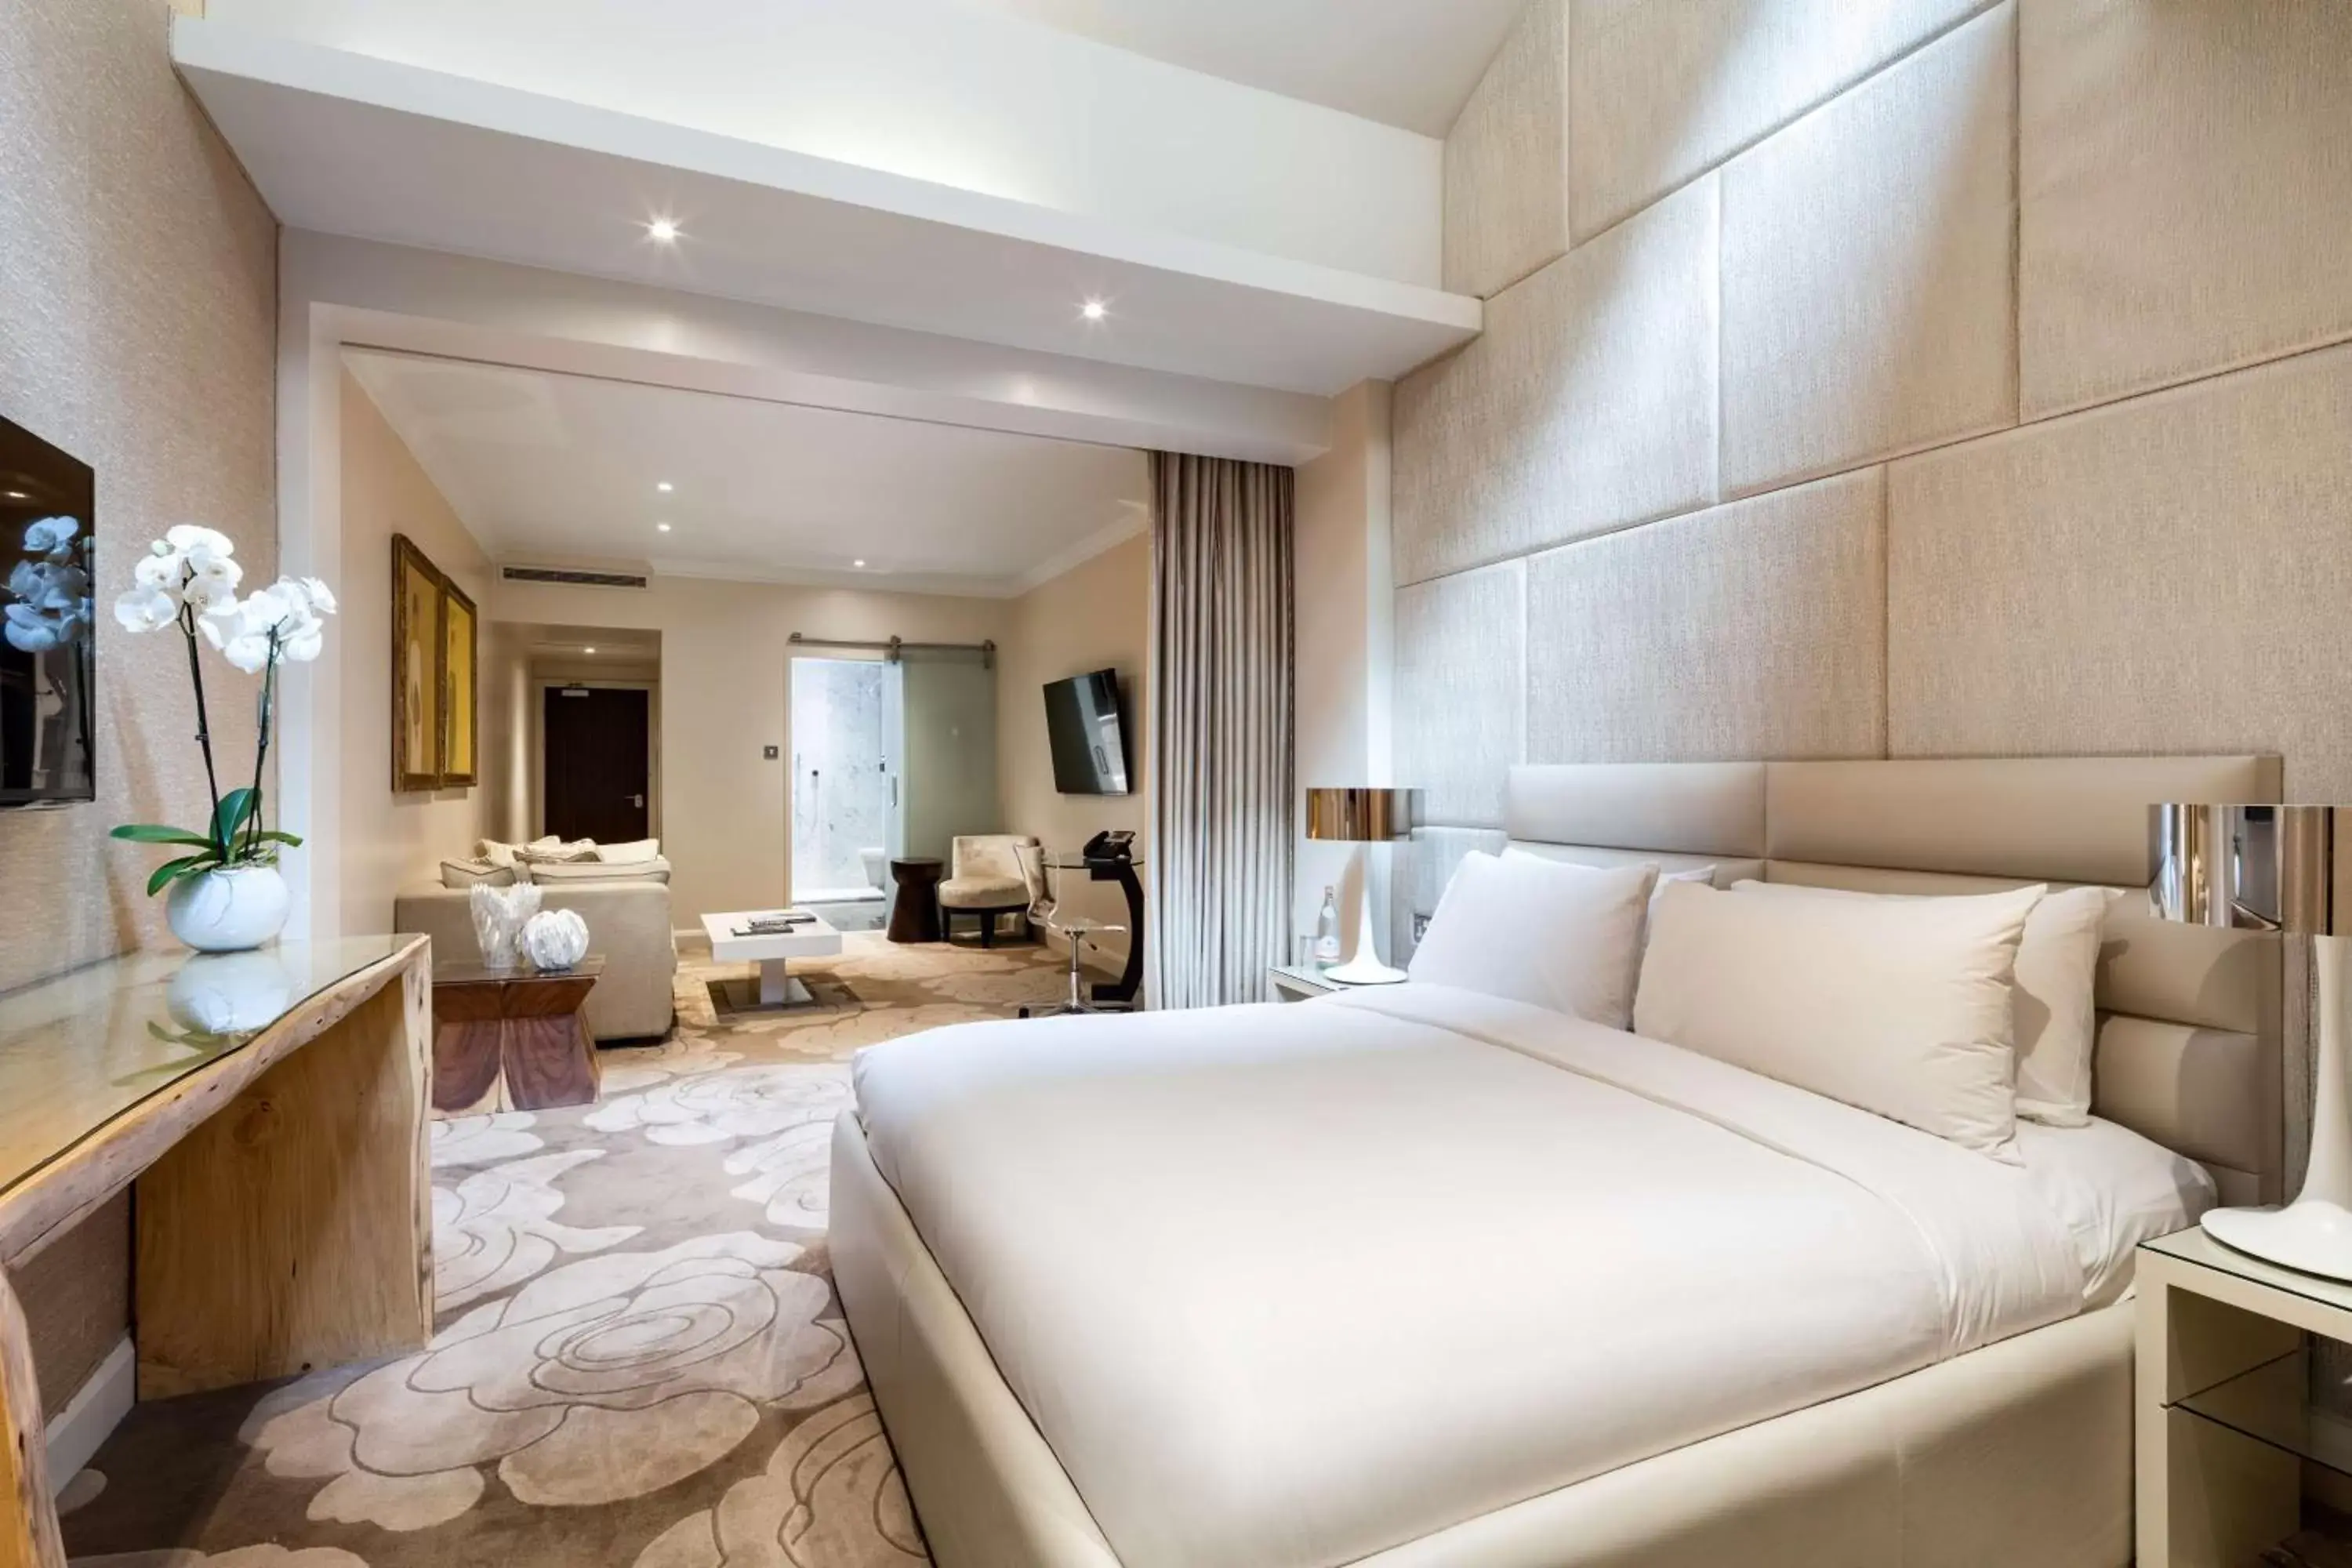 Studio Suite in The May Fair, A Radisson Collection Hotel, Mayfair London